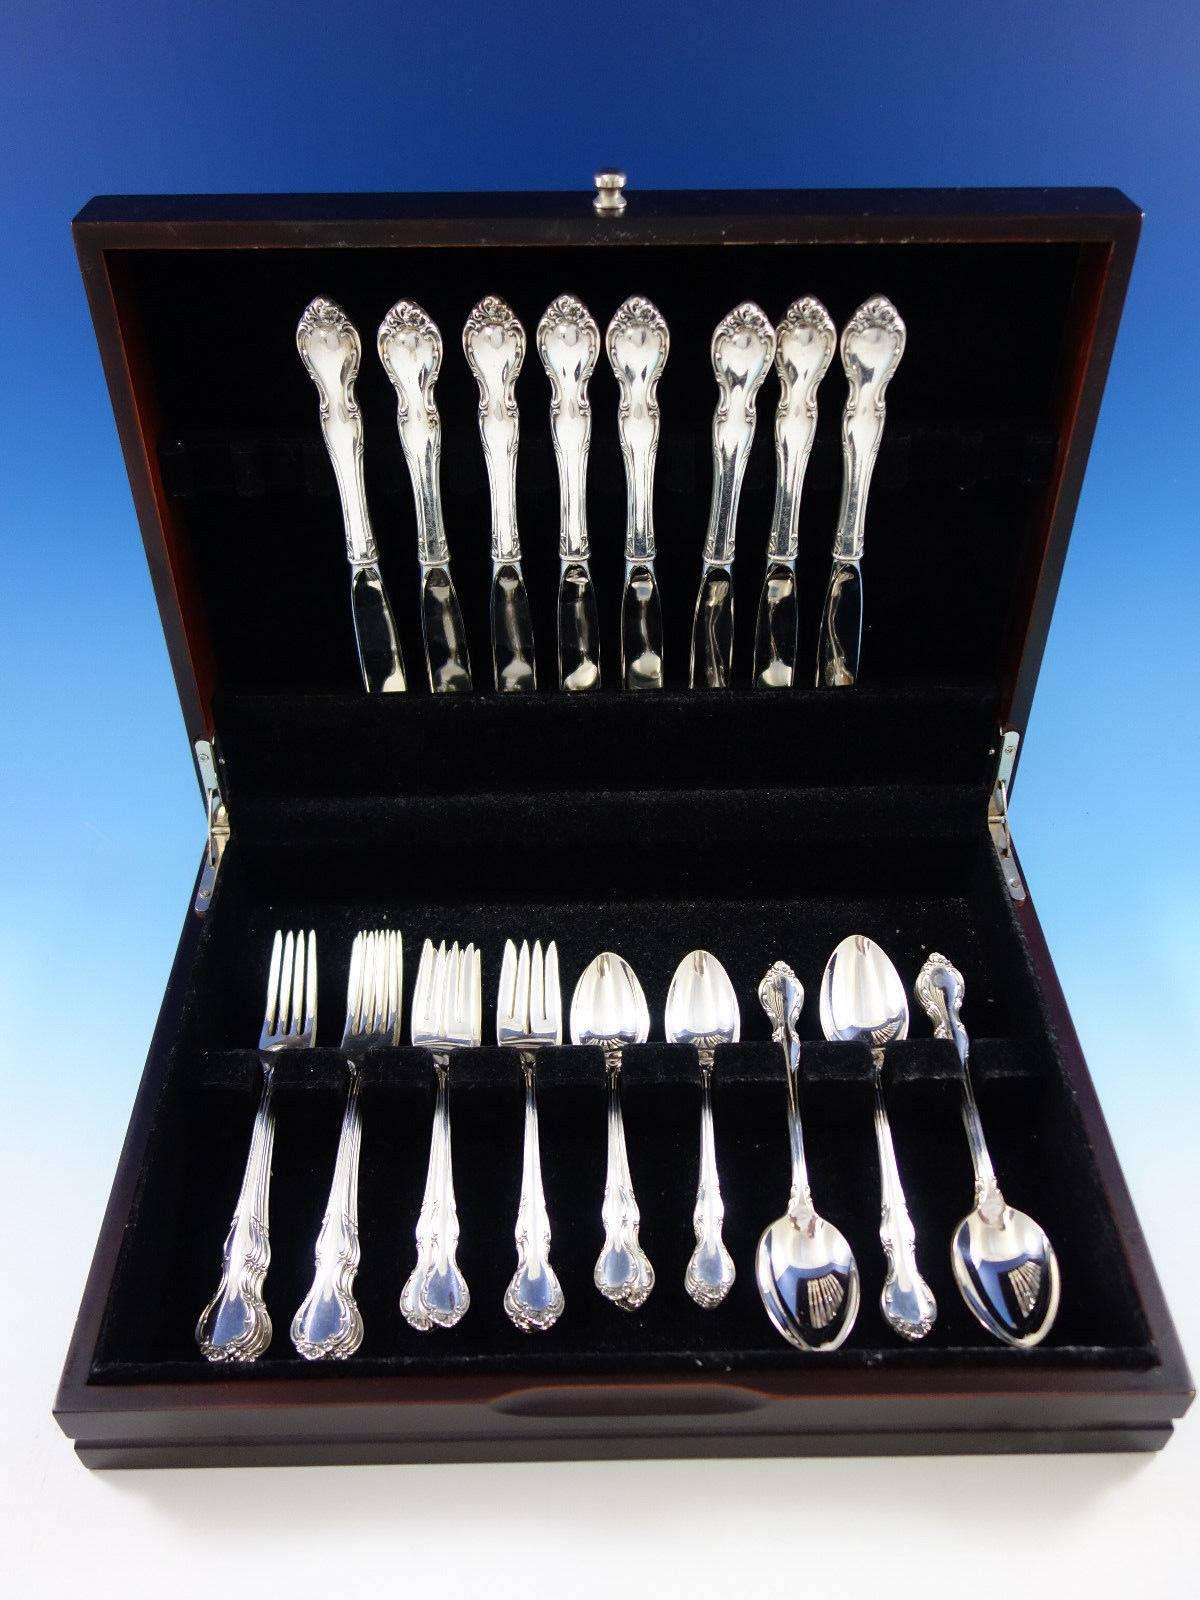 Pirouette by Alvin sterling silver flatware set - 40 pieces. This set includes: 

Eight knives, 9 1/4